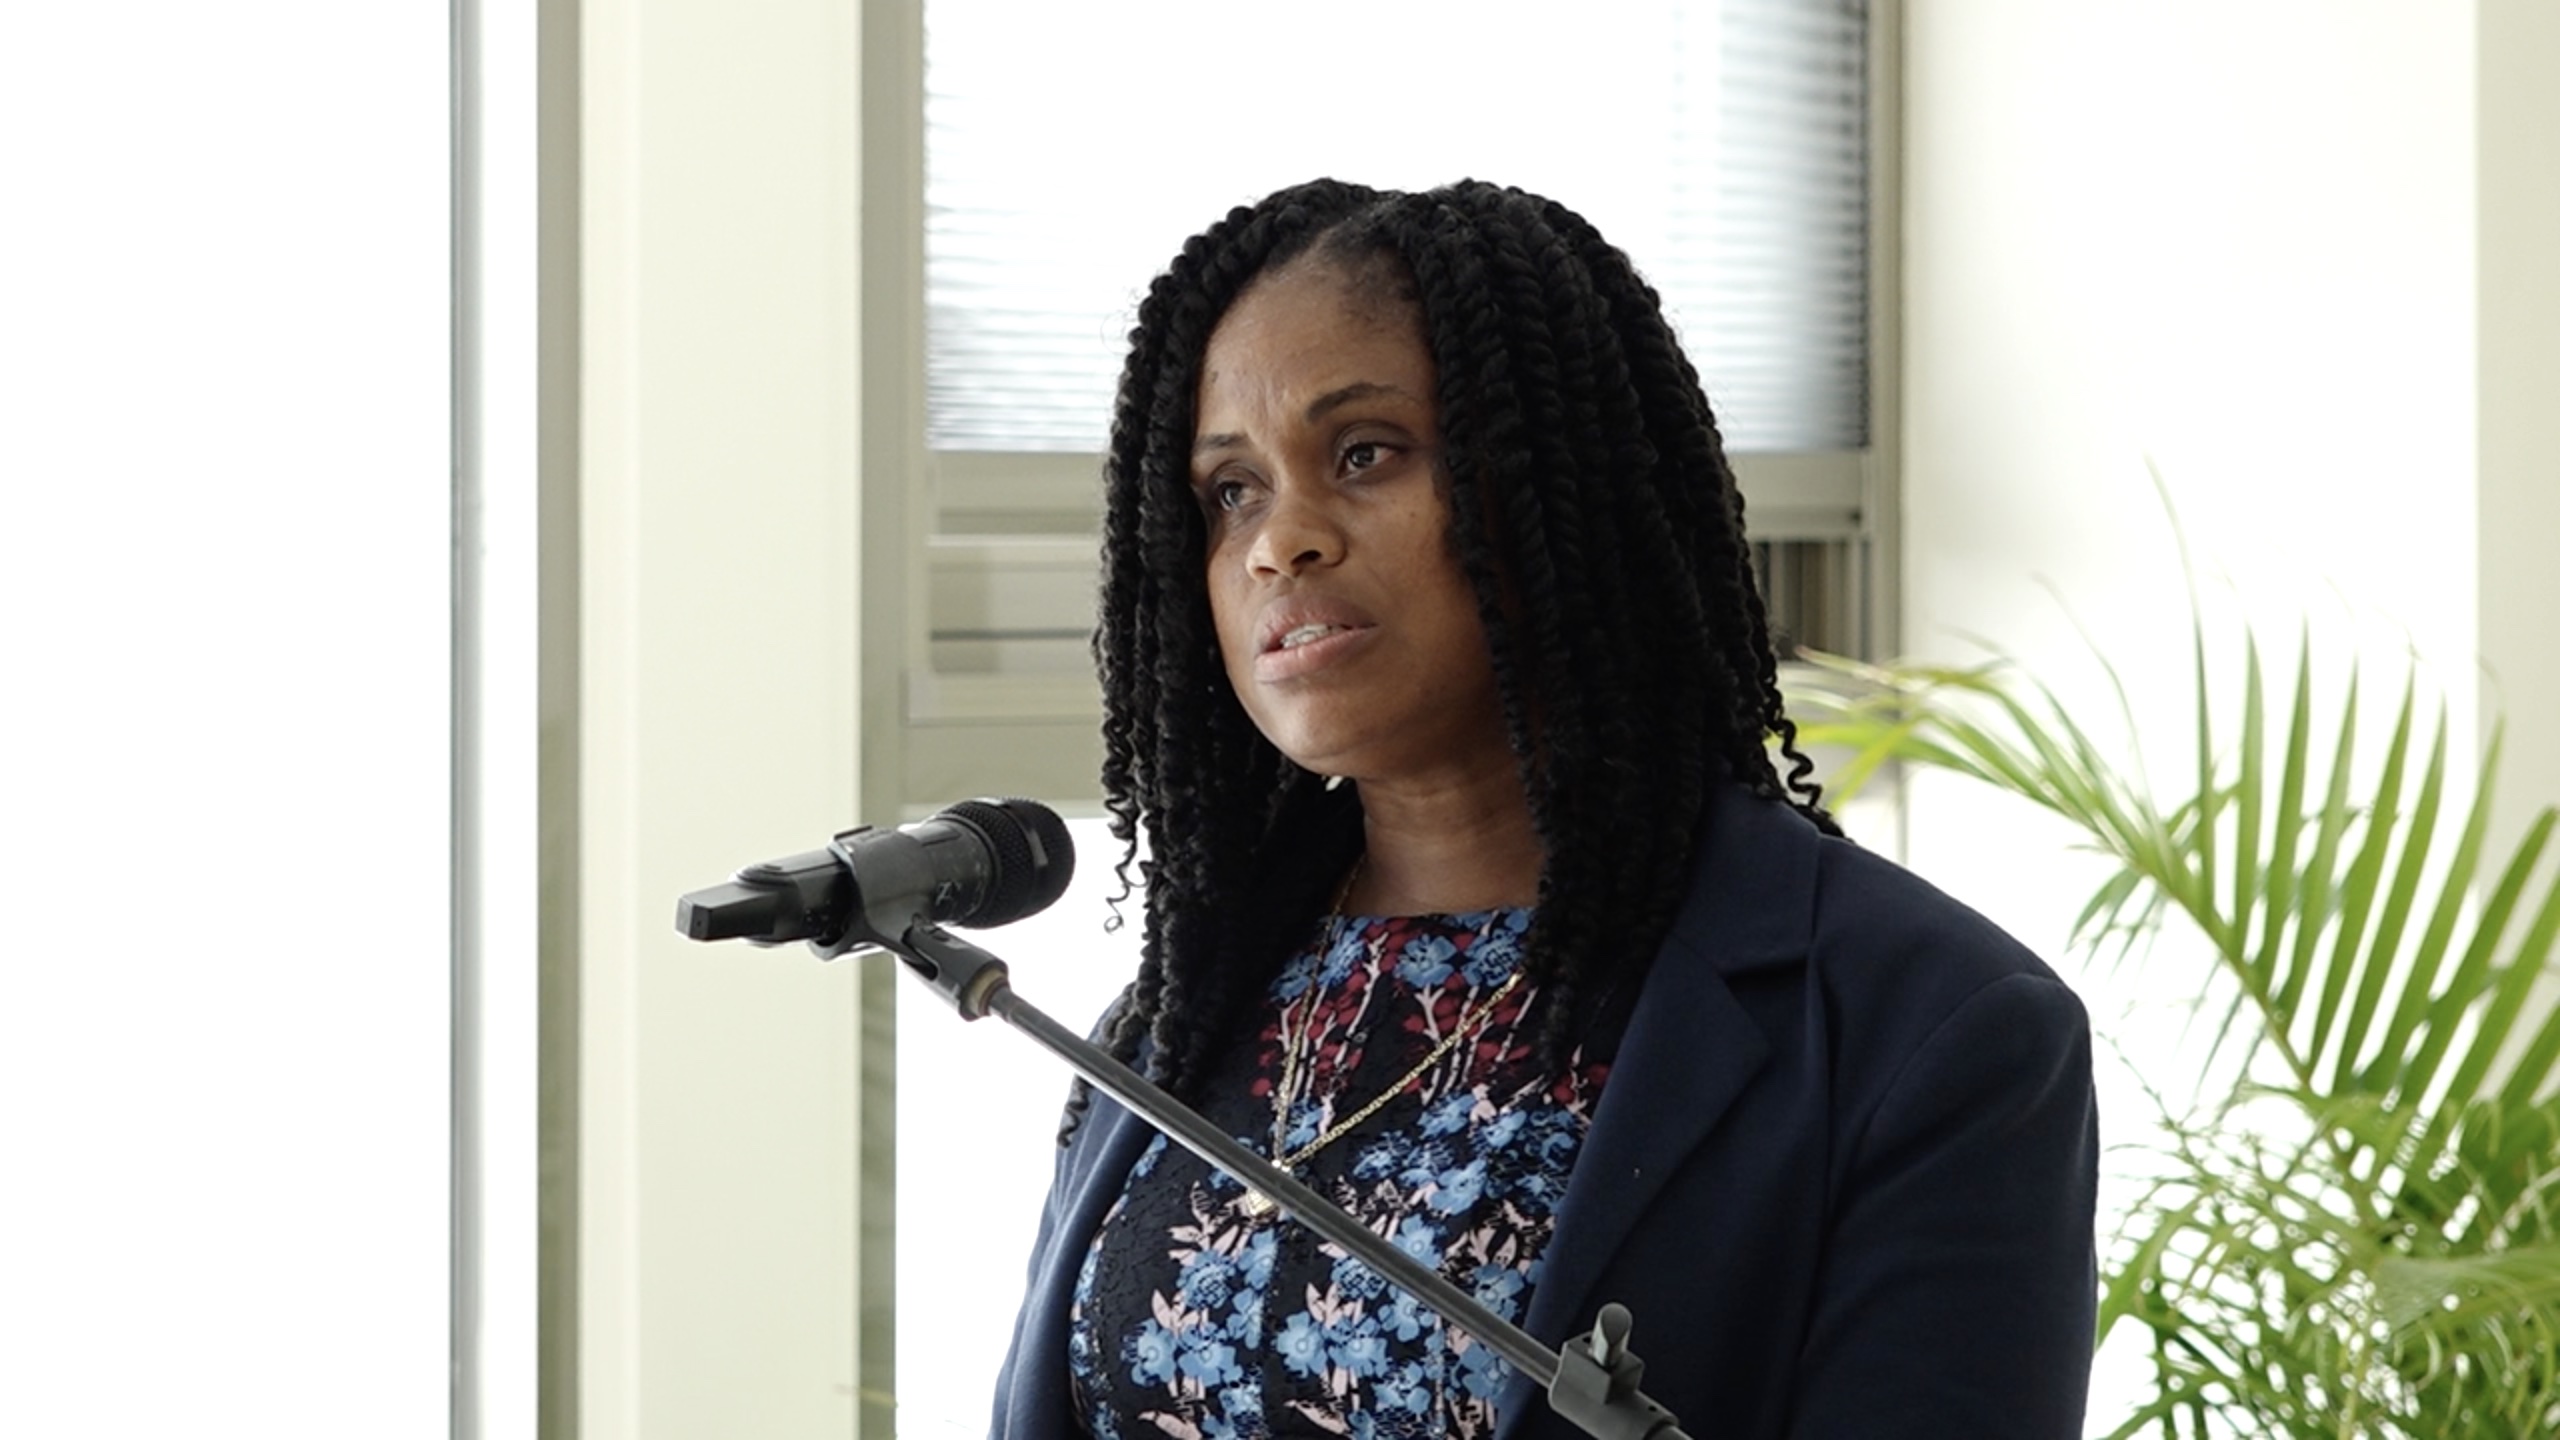 Ms. Latoya Jeffers, Assistant Secretary in the Ministry of Health and Gender Affairs, delivering an address on behalf of Hon. Hazel Brandy-Williams, Junior Minister of Health and Gender Affairs in the Nevis Island Administration at Gender Expo '22 at the Malcolm Guishard Recreational Park on March 18, 2022